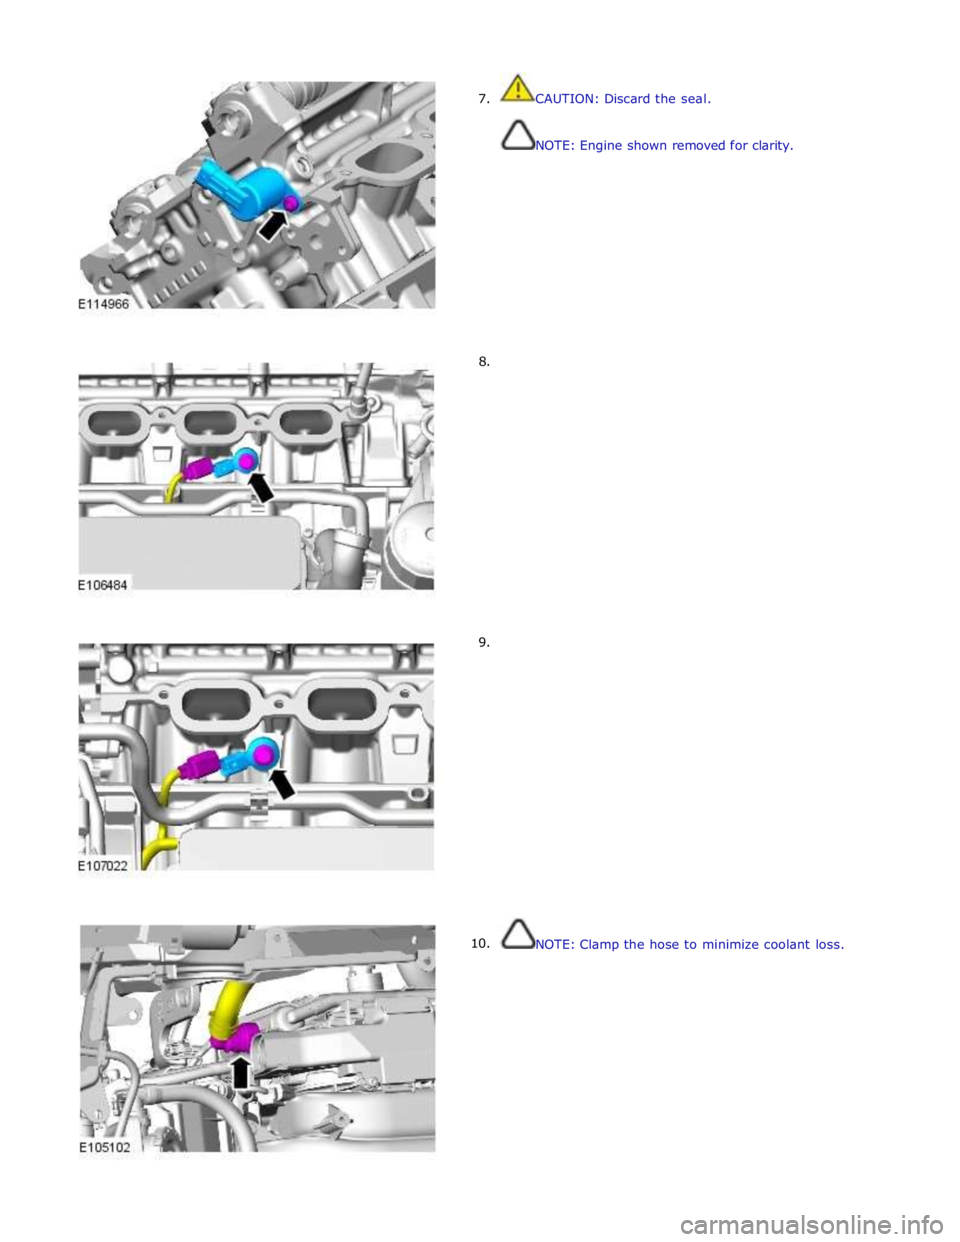 JAGUAR XFR 2010 1.G User Guide  
7. 
 
 
 
 
 
 
 
 
 
 
 
 
 
 
 
 
        8. 
        9. 
10. CAUTION: Discard the seal. 
 
 
NOTE: Engine shown removed for clarity. 
 
 
 
 
 
 
 
 
 
 
 
 
 
 
 
 
 
 
 
 
 
 
 
 
 
 
 
 
 
 
 